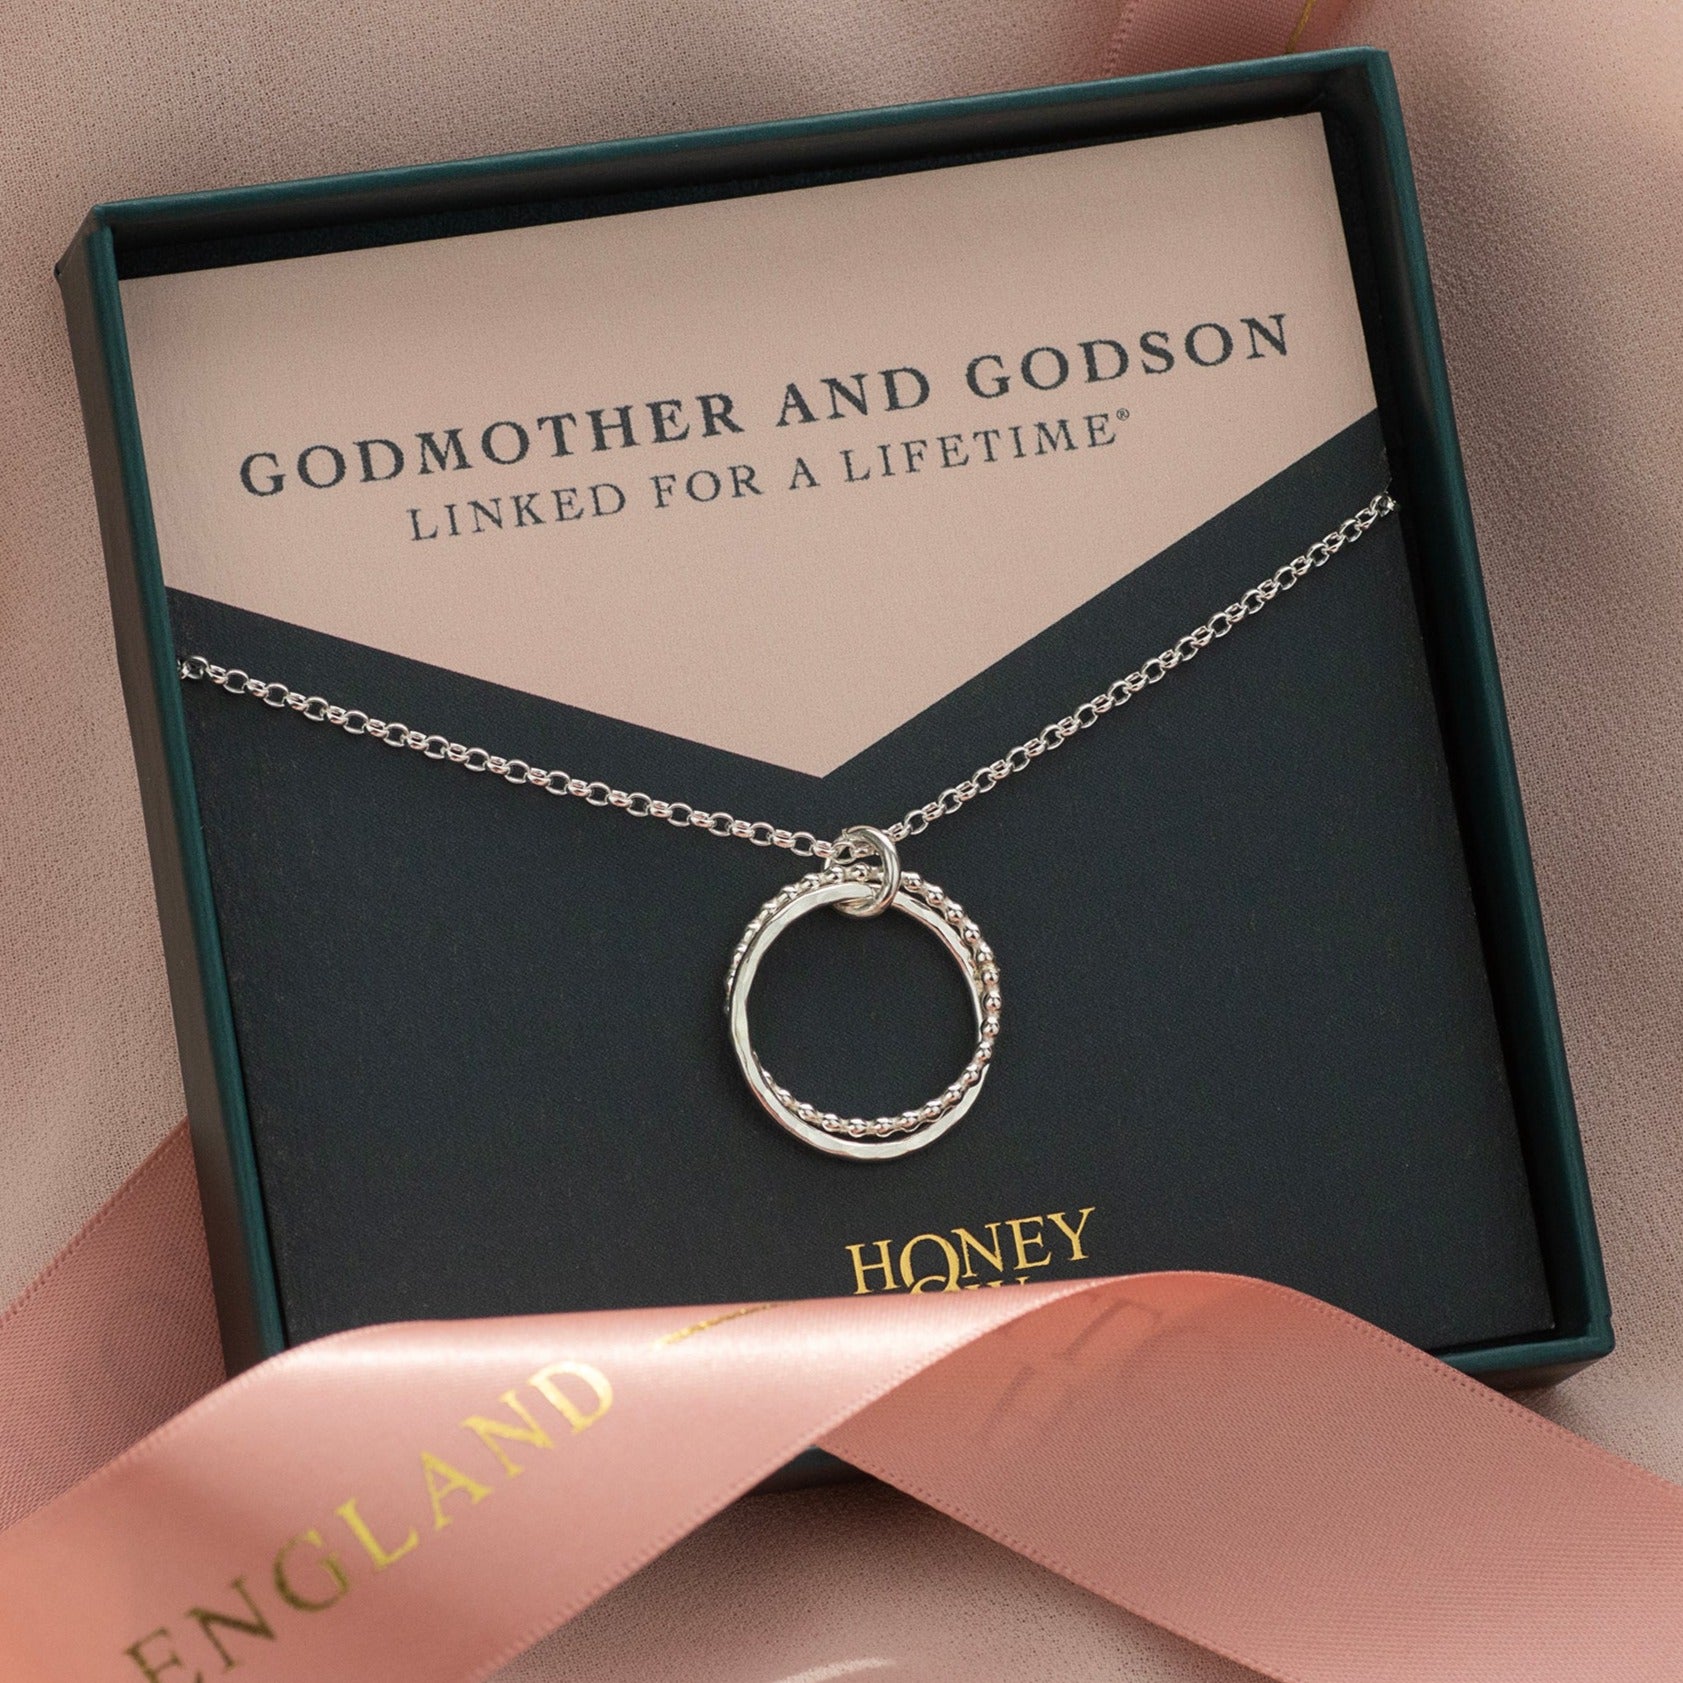 Gift for Godmother from Godson - Silver Necklace - Linked for a Lifetime